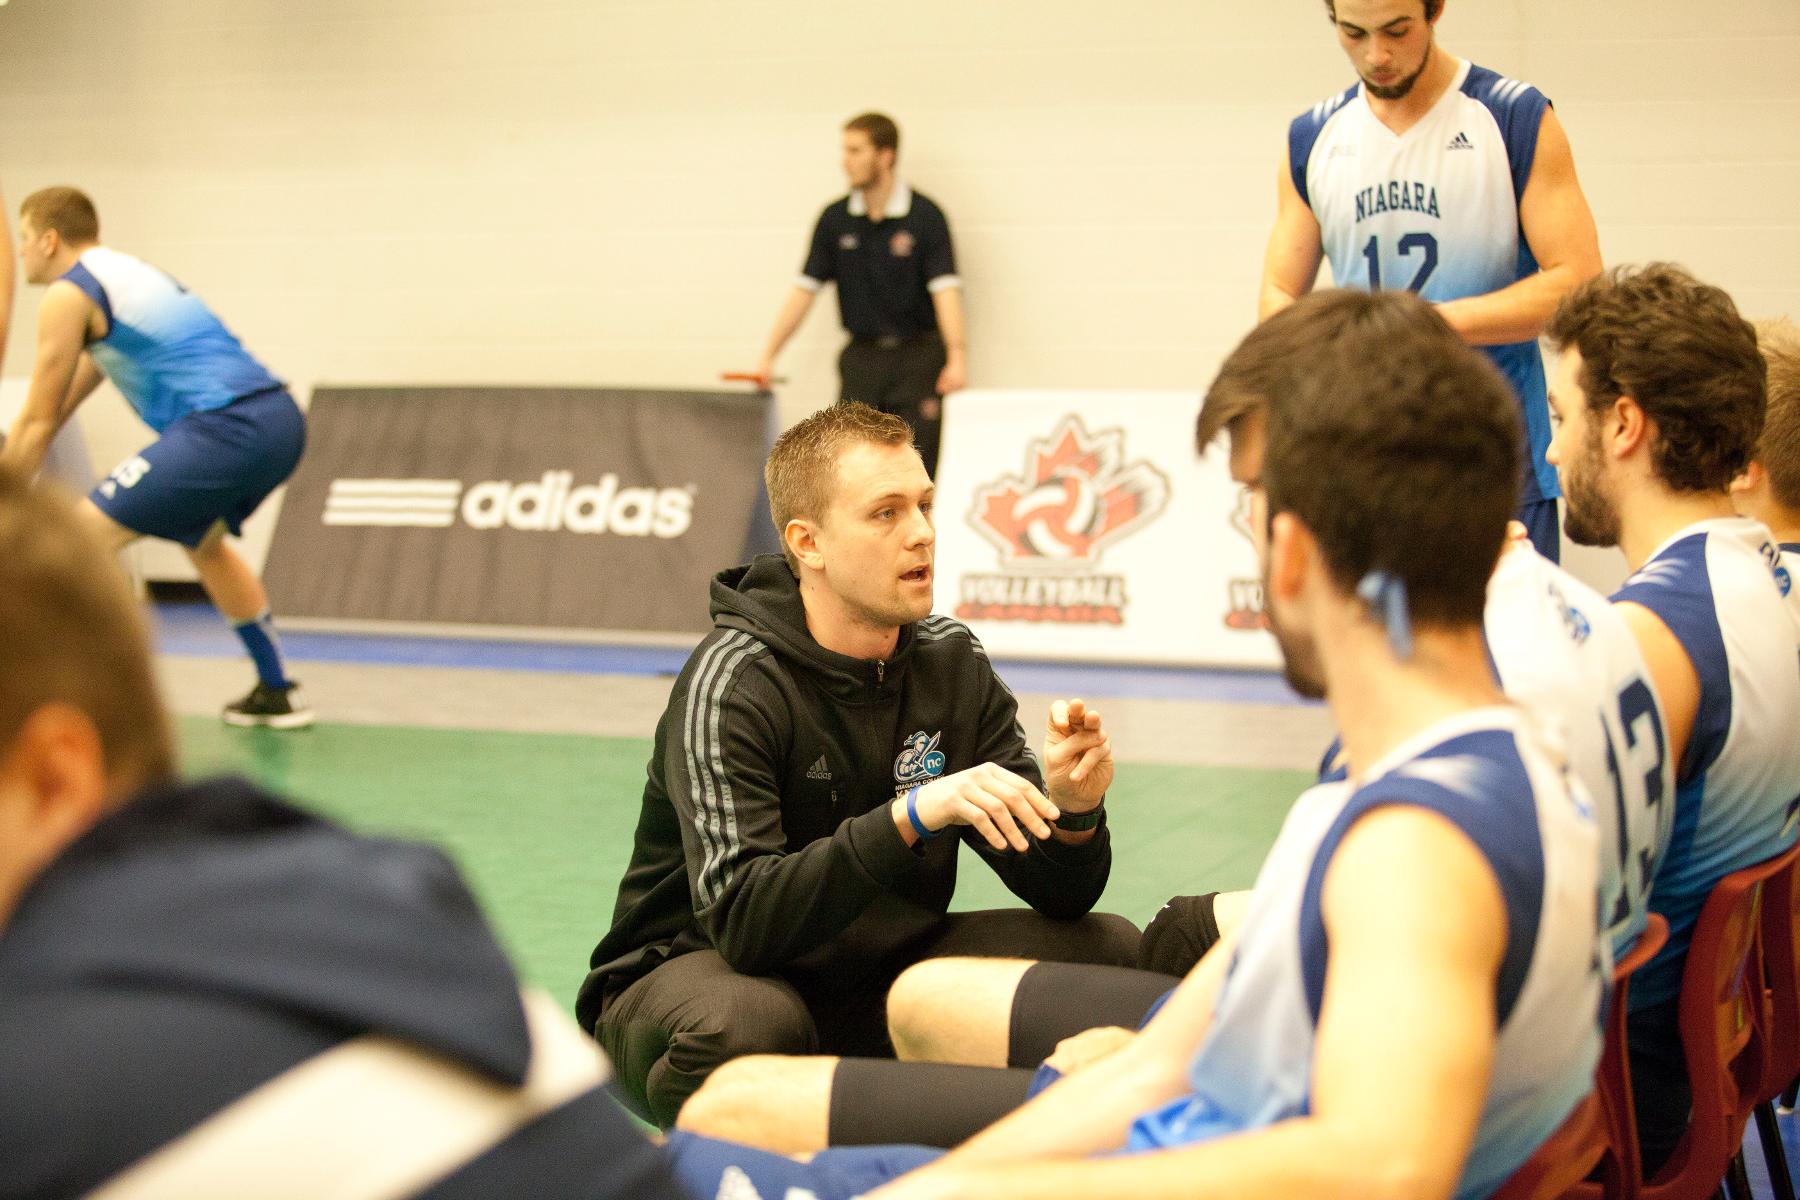 Canada’s top youth volleyball players to descend on Niagara College